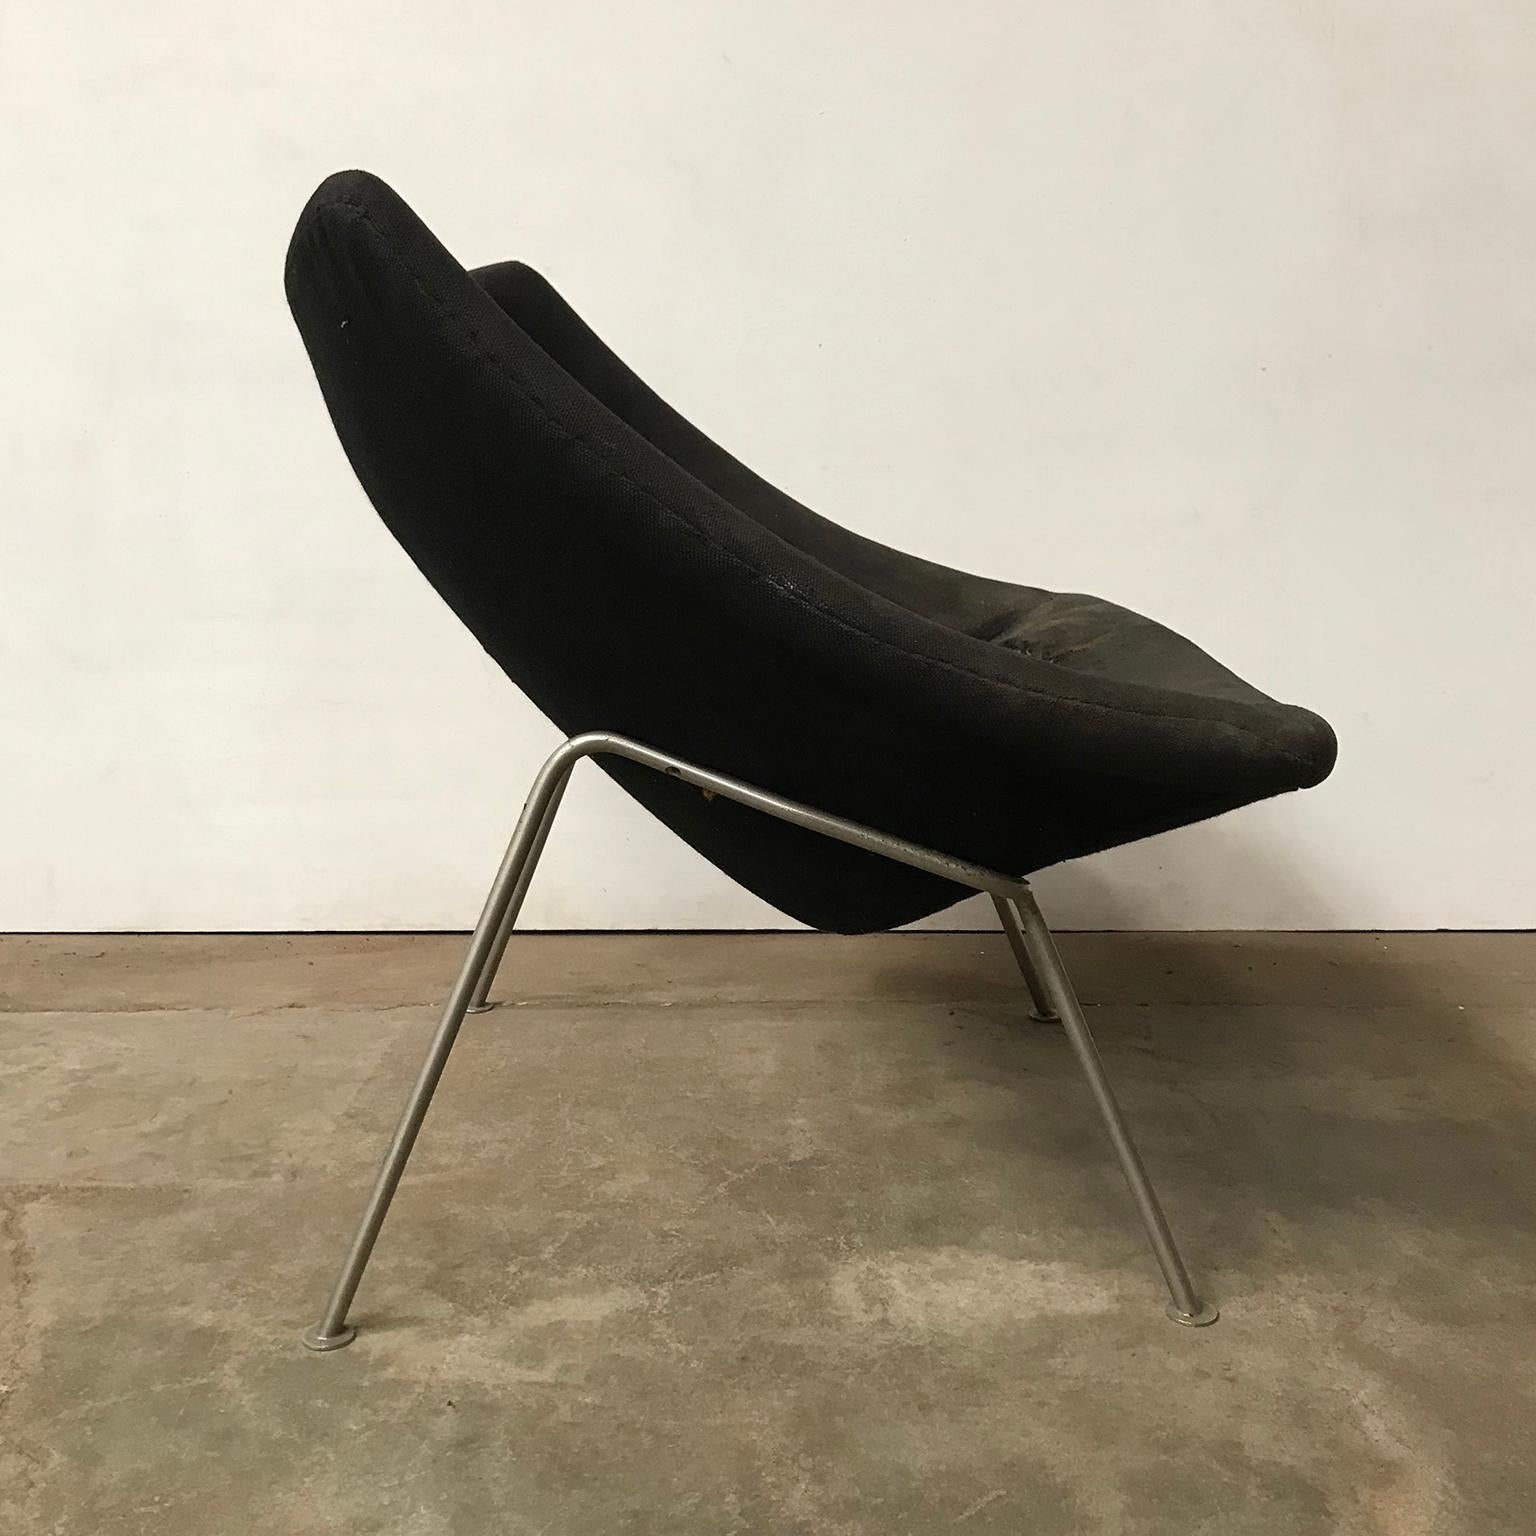 Original early chairs are not chromed. The chrome version is always a recent production.

This Oyster in black upholstery. The chair is not assembled, because screws are missing. The shell needs some restoration like re-upholstery because of the